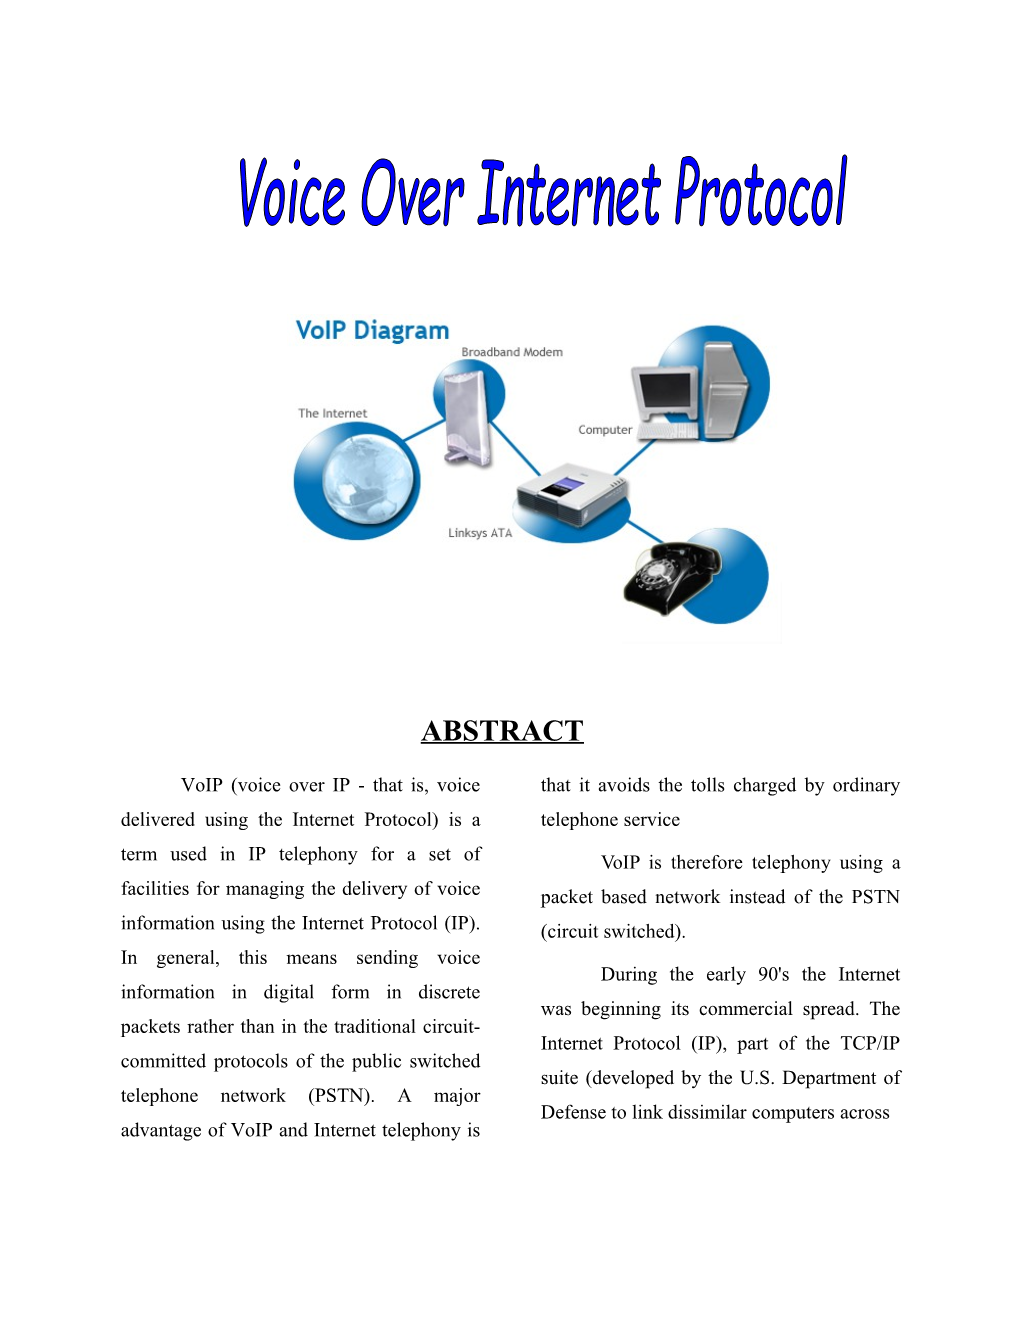 Voip Is Therefore Telephony Using a Packet Based Network Instead of the PSTN (Circuit Switched)